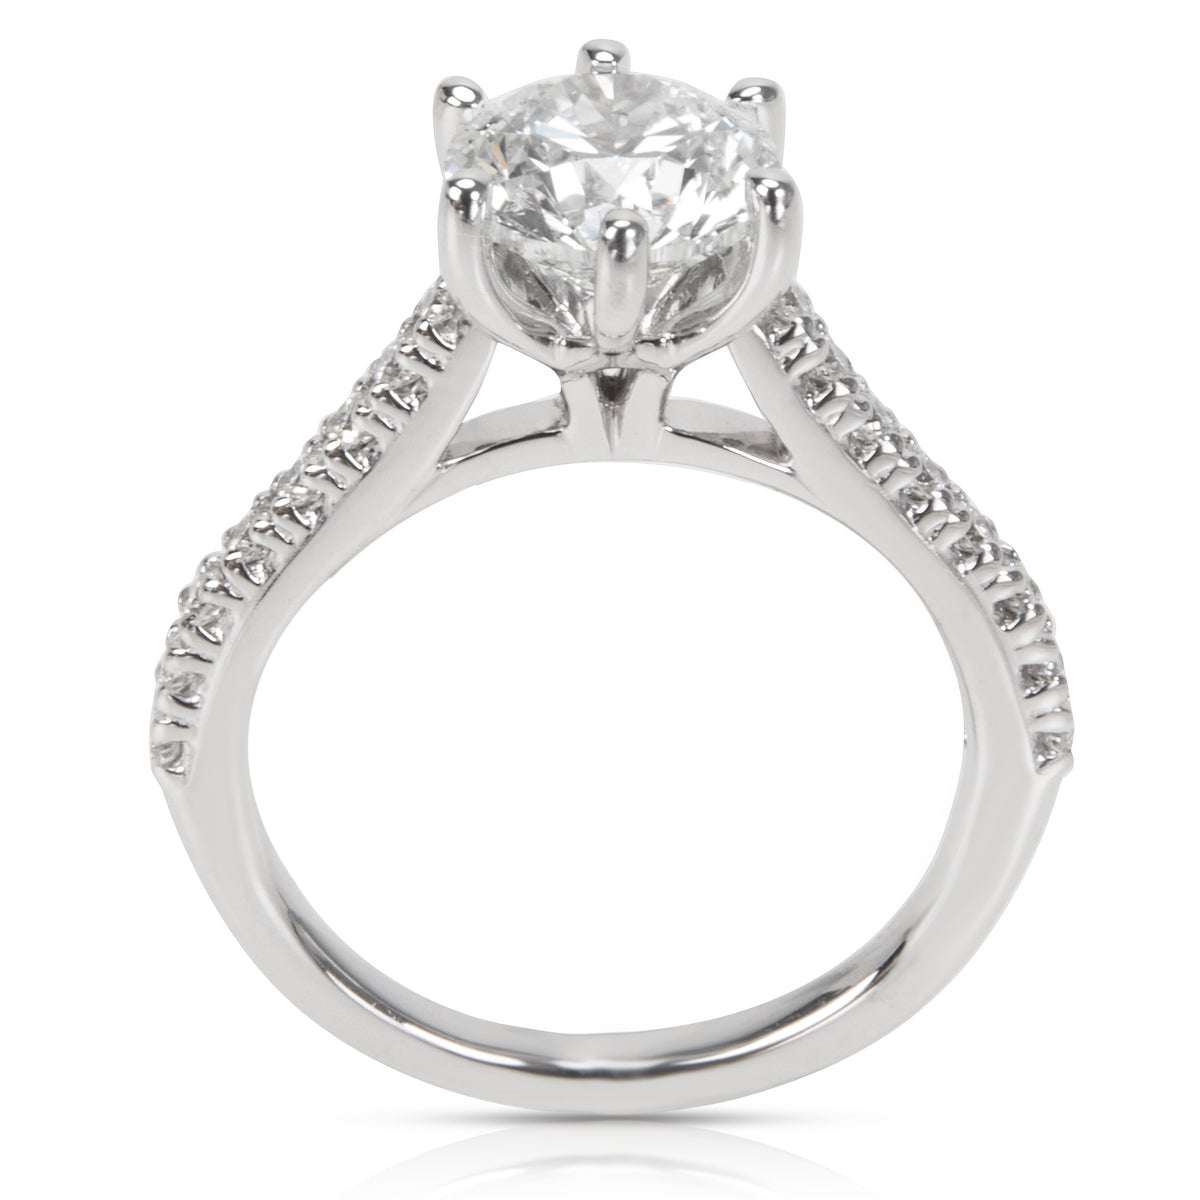 AGS Certified Ritani Diamond Engagement Ring (1.60 ct H/SI2)